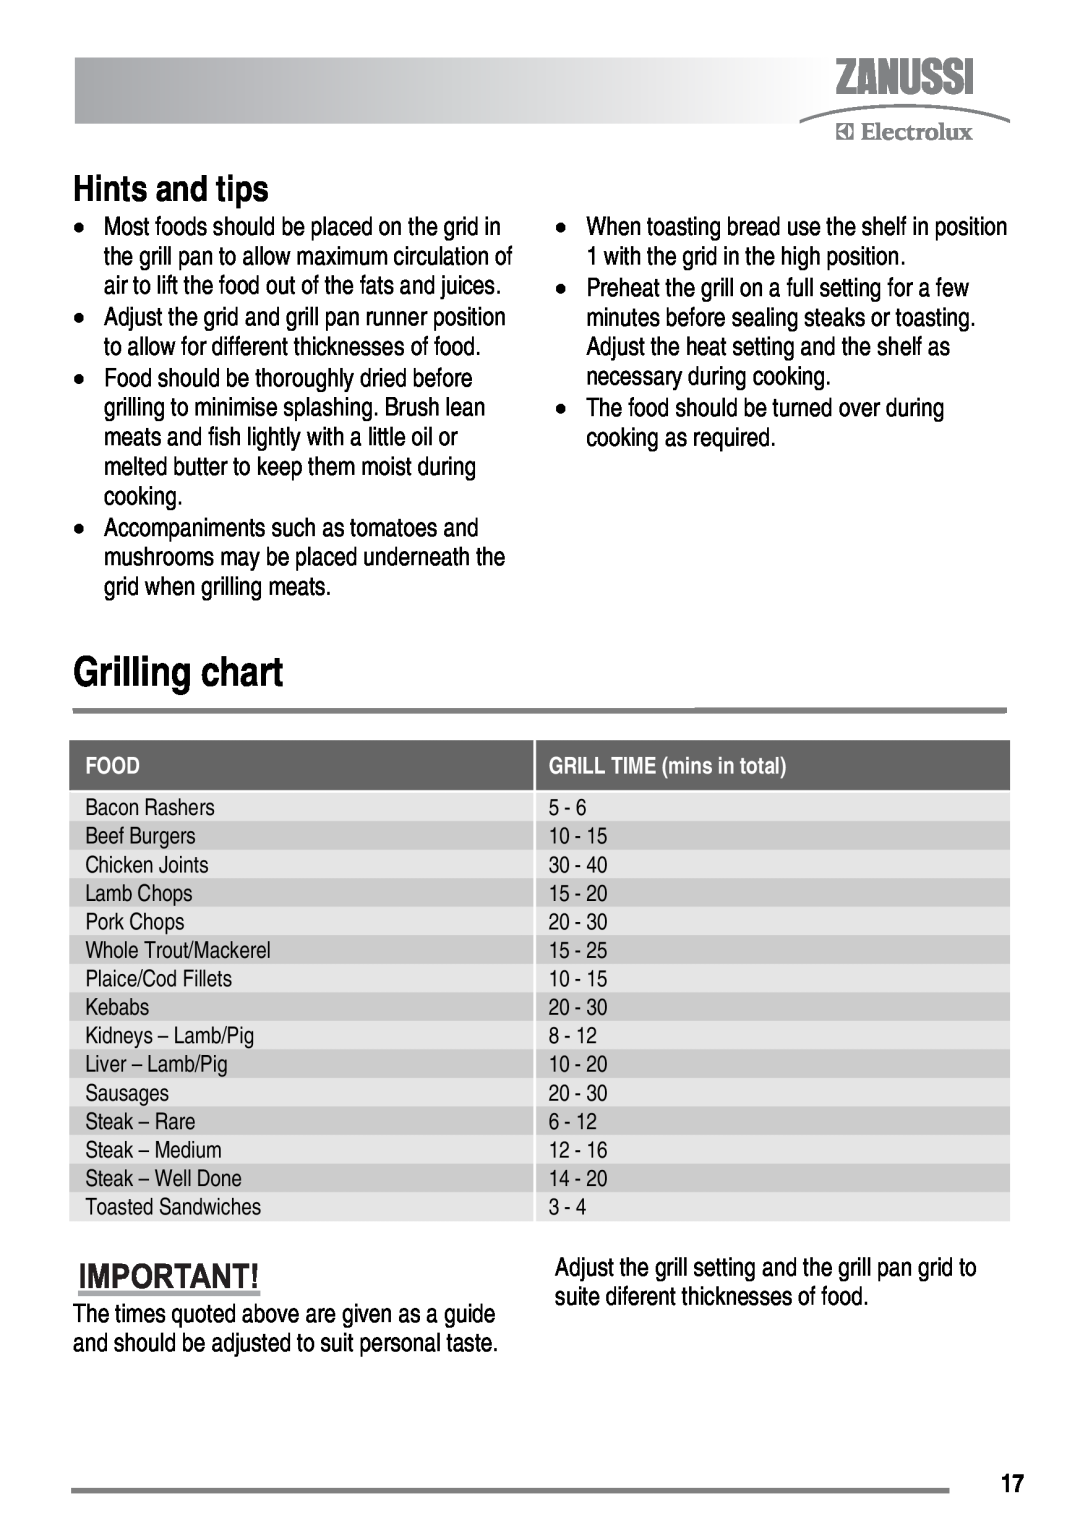 Zanussi FH10 Grilling chart, The food should be turned over during cooking as required, Food, GRILL TIME mins in total 